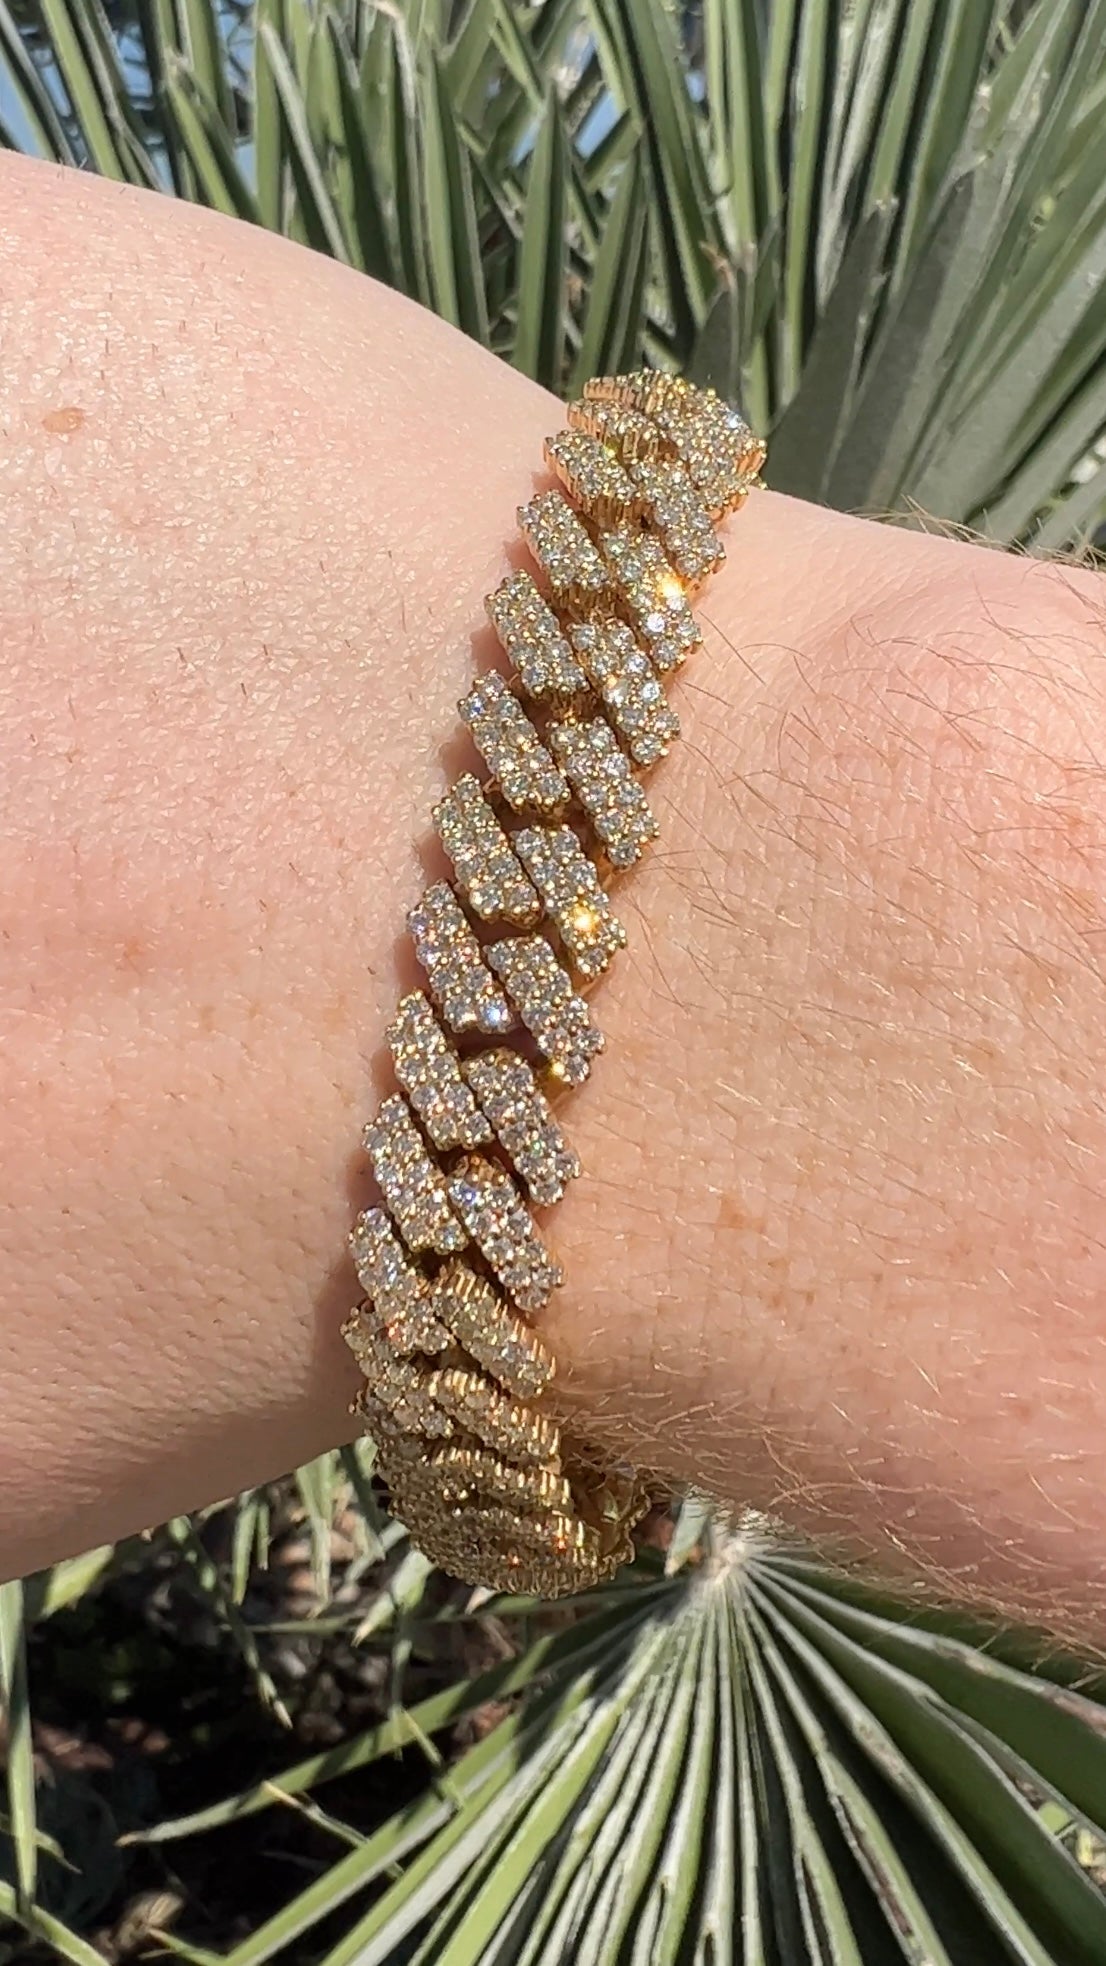 Diamond Cuban Link Bracelet (12mm) in Yellow Gold - 8 Inches - Gold Presidents